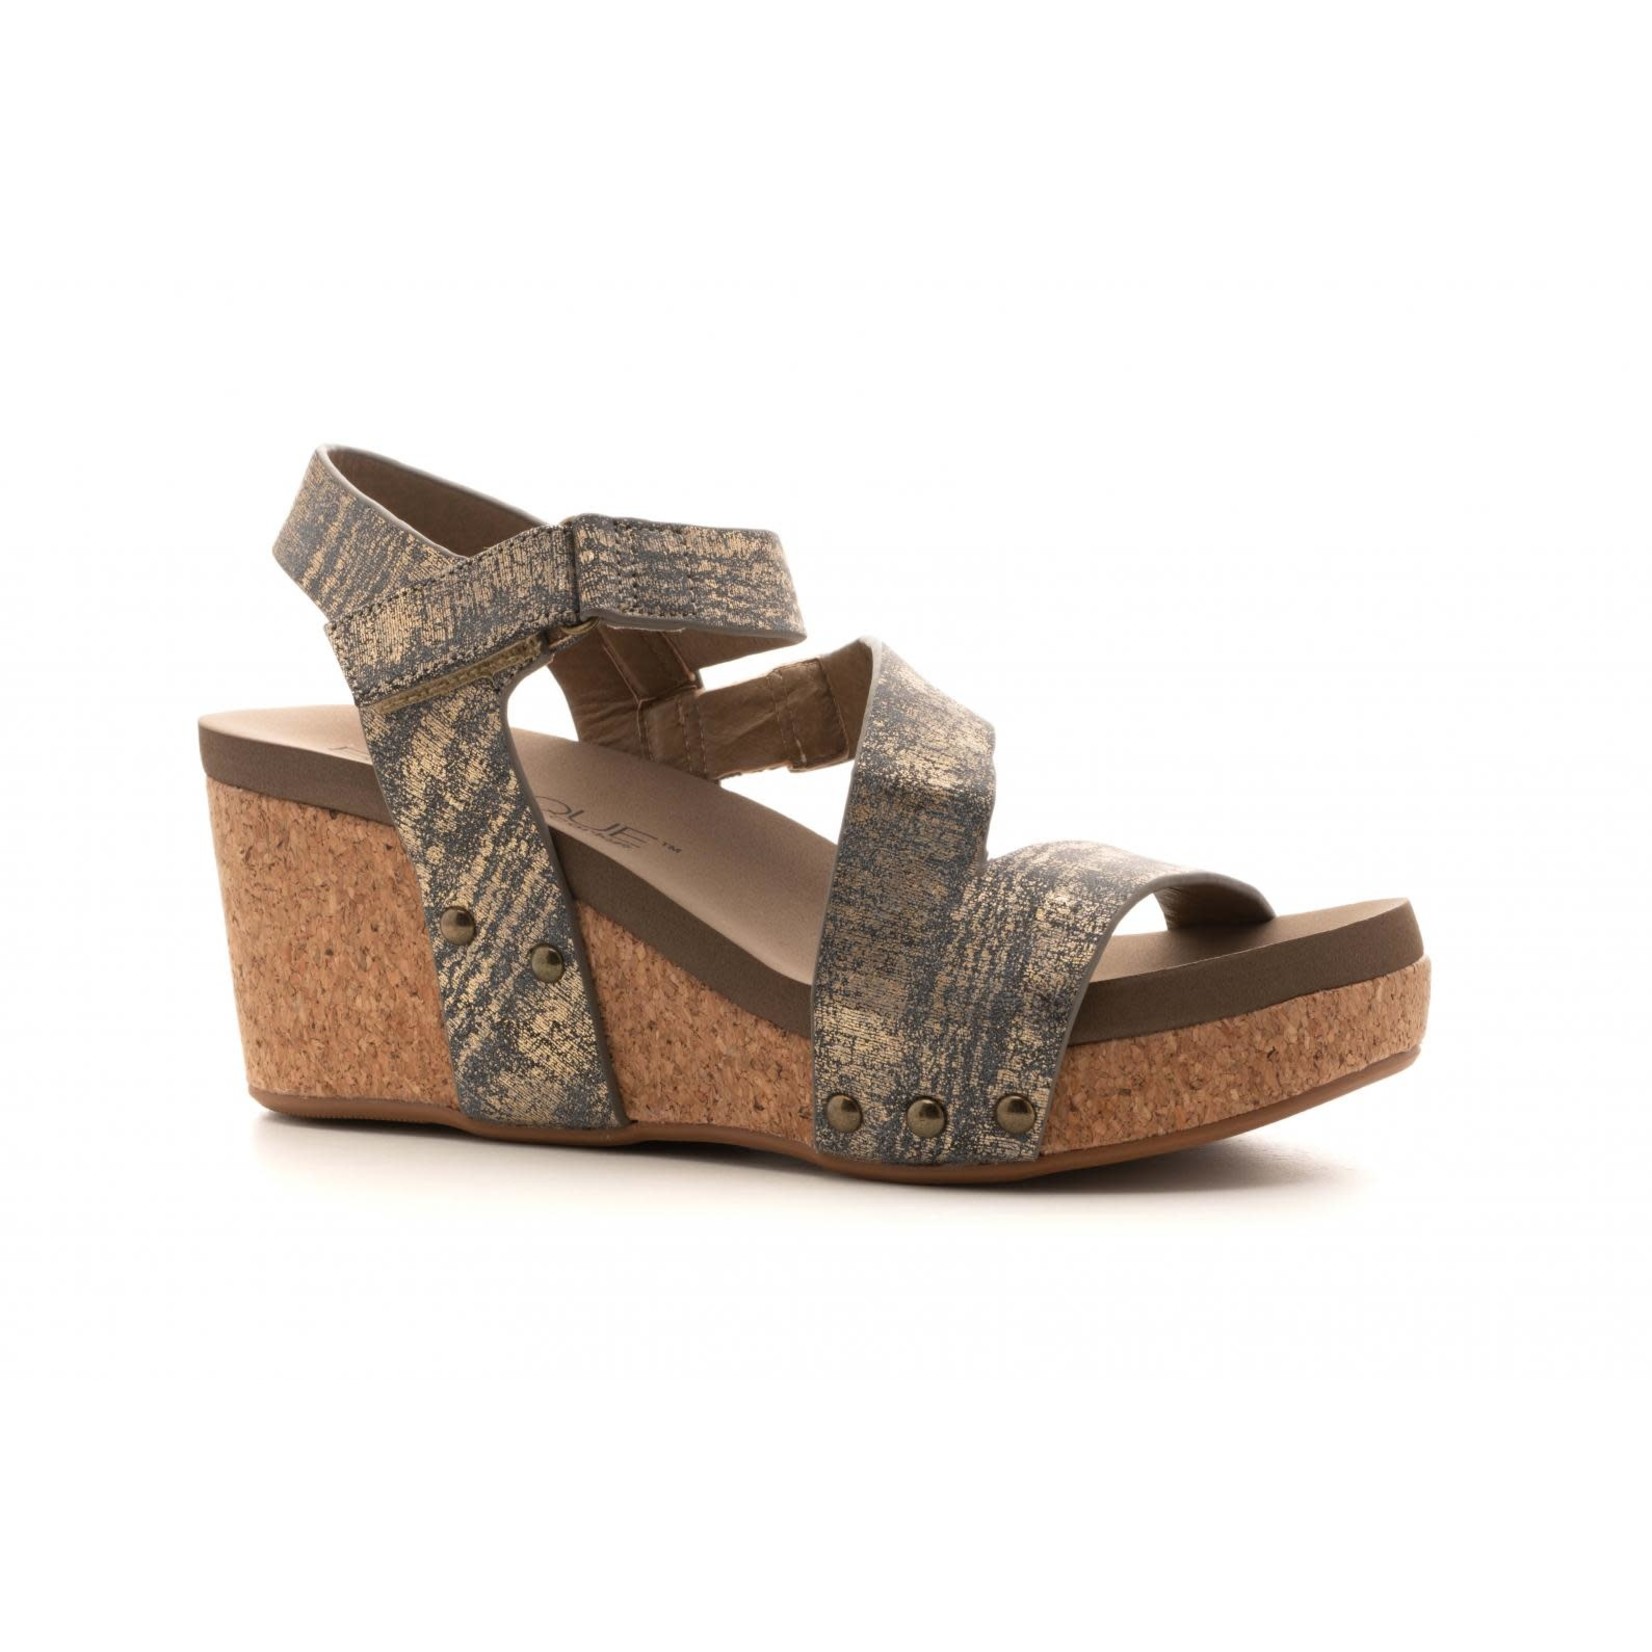 Corkys Corky's Spring Fling Wedge